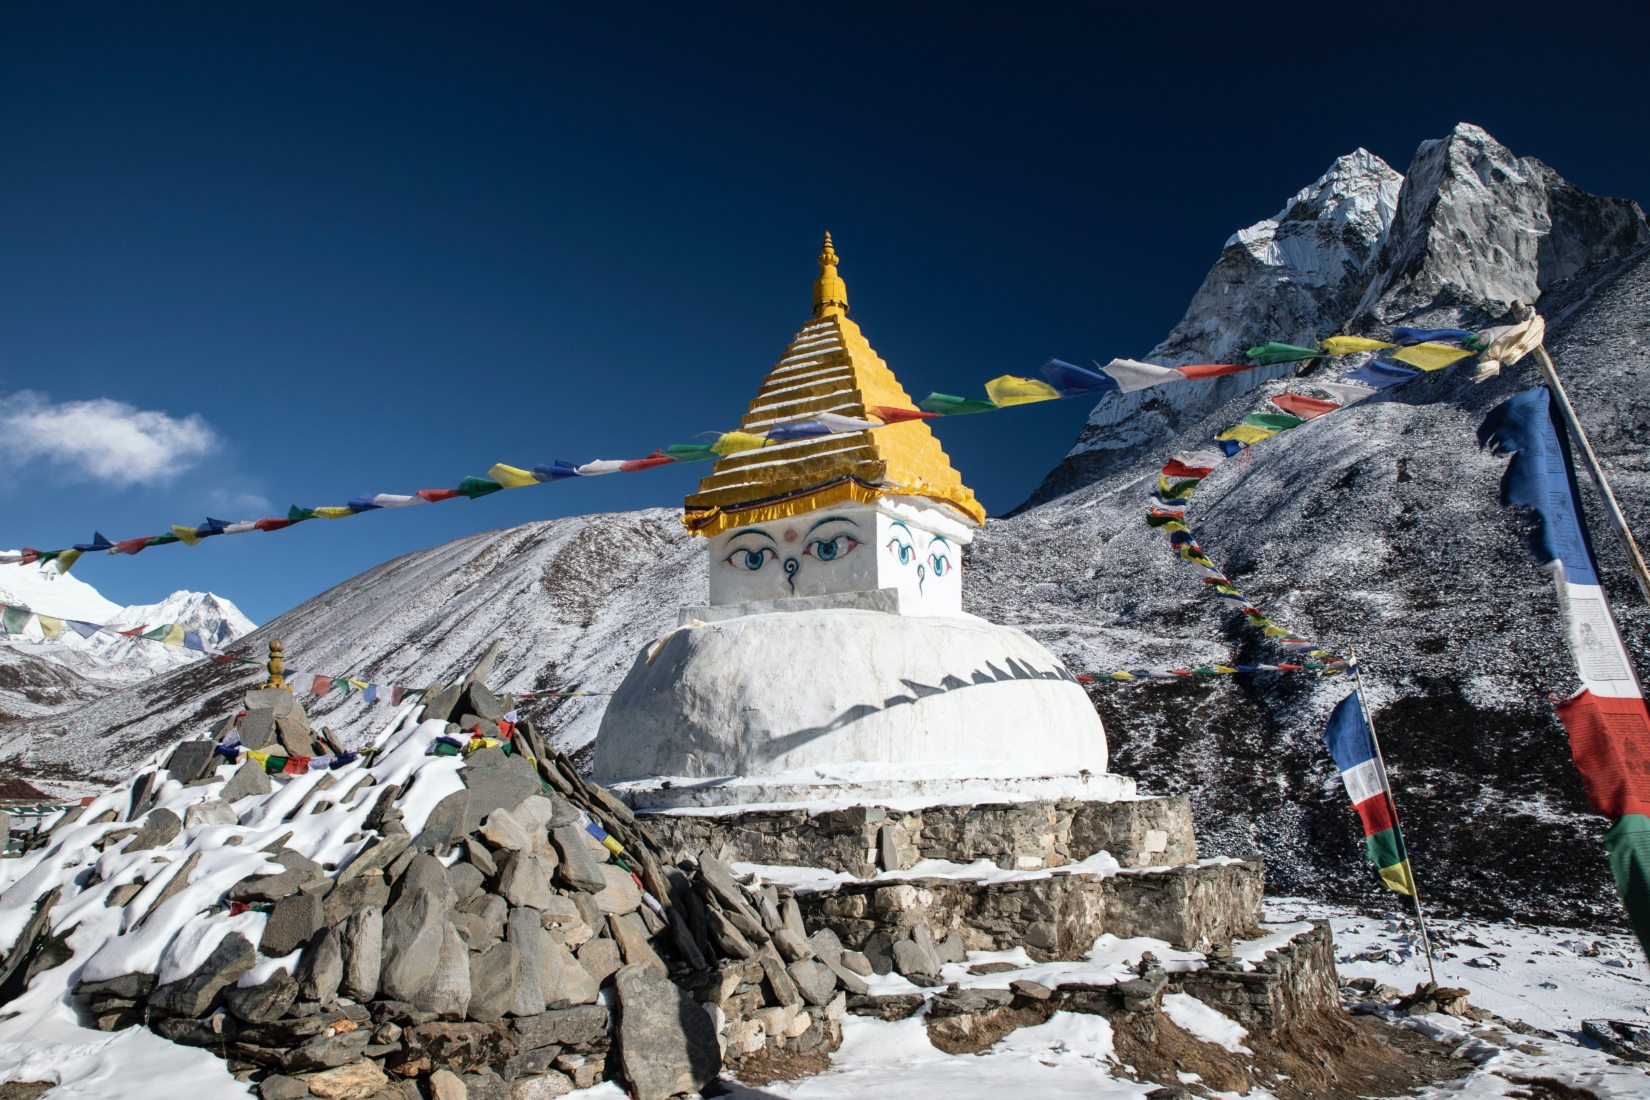 A stupa with eyes and a golden top, with strings of prayer flags, surrounded by mountains near Dingboche in Nepal